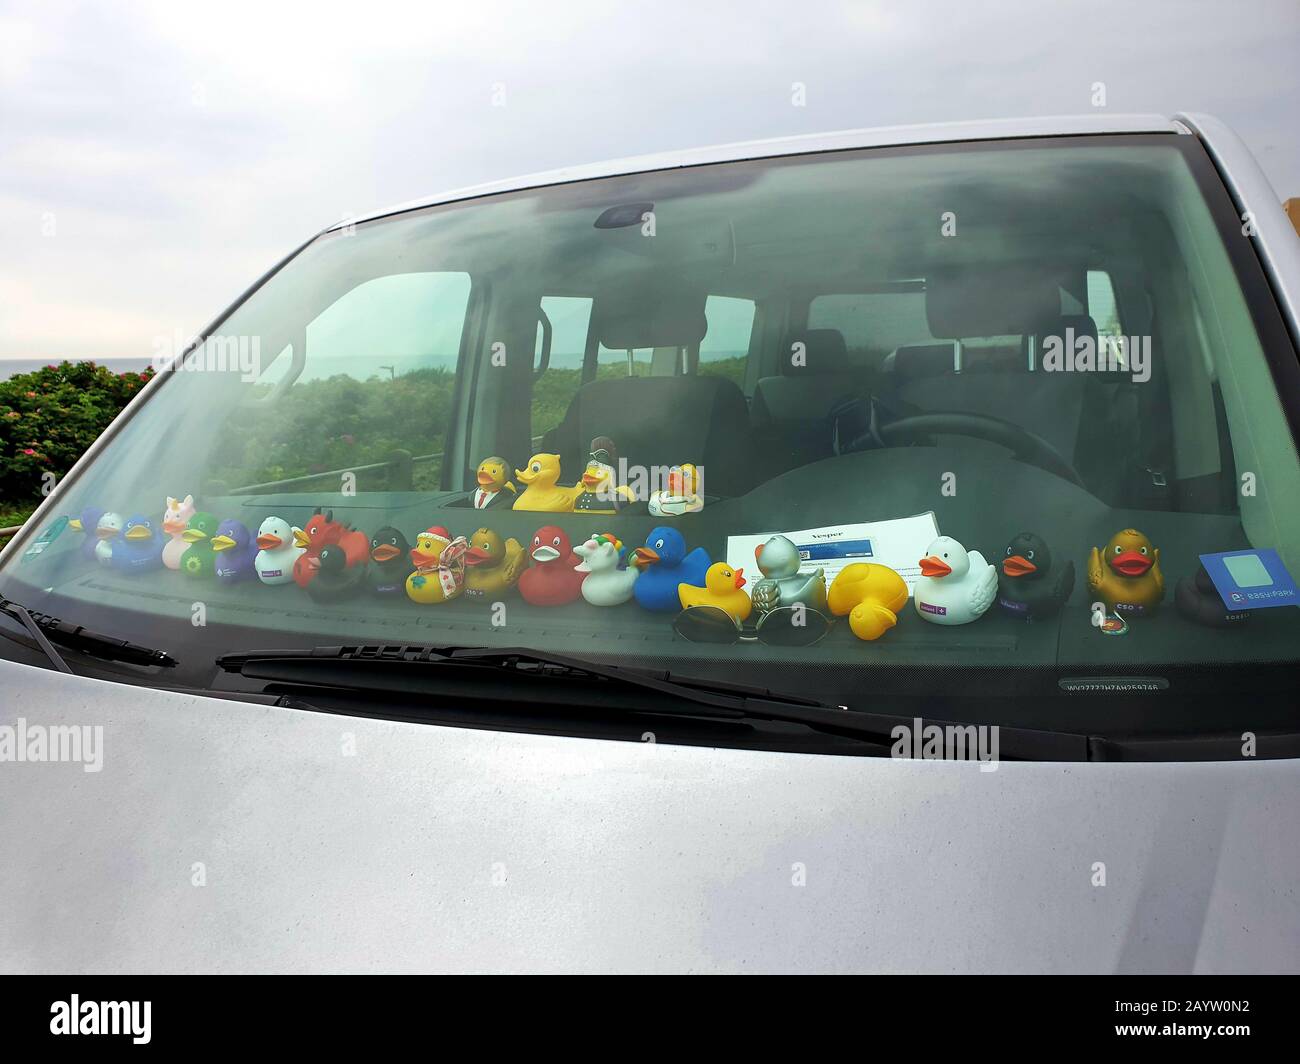 rubber ducks in a car, Germany Stock Photo